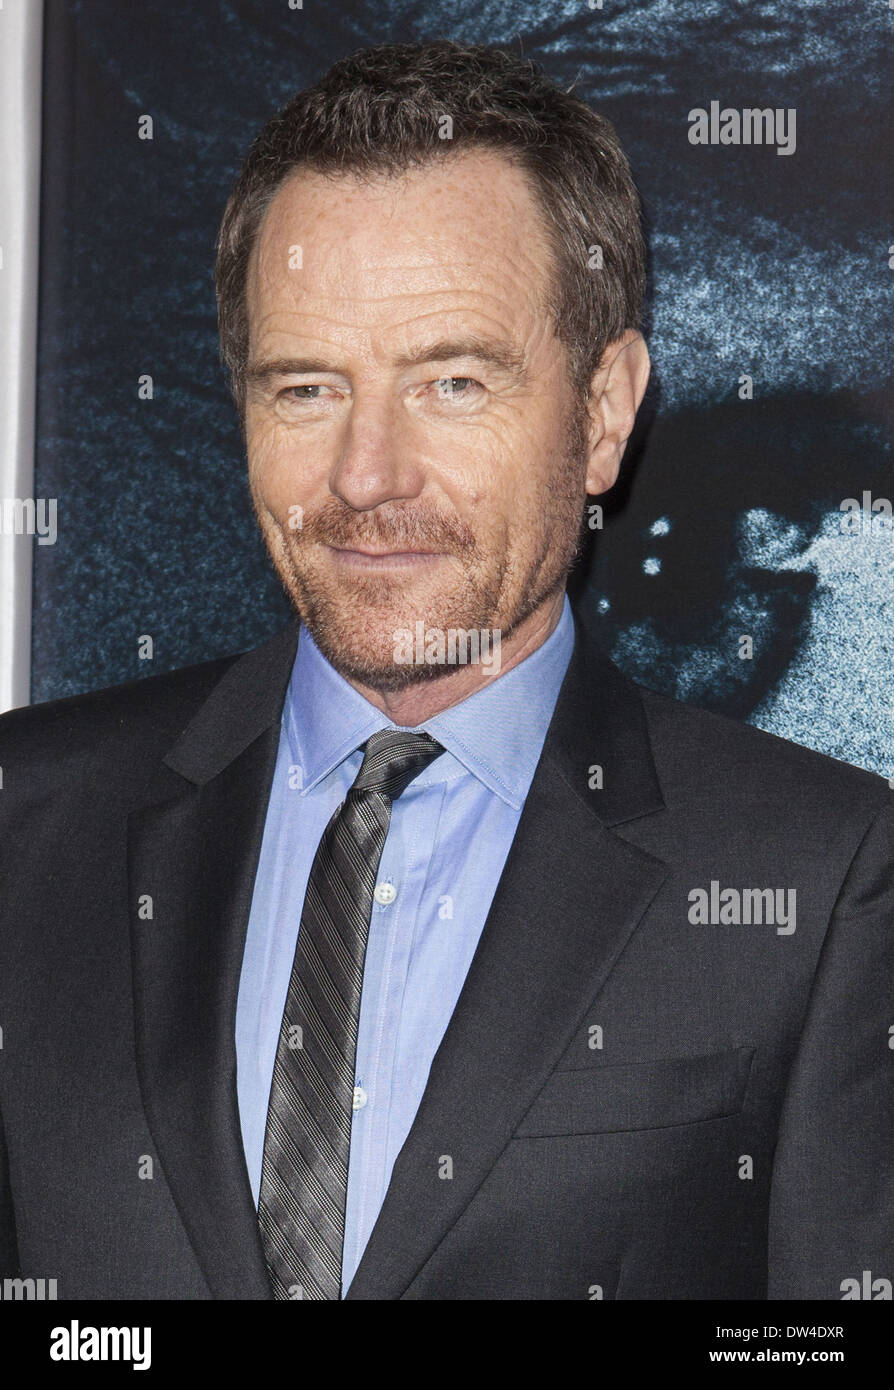 Bryan Cranston arrives at the 'Argo' - Los Angeles Premiere at AMPAS Samuel Goldwyn Theater Beverly Hills Los Angeles, California - 04.10.12 Featuring: Bryan Cranston Where: Beverly Hills, California, United States When: 04 Oct 2012 Stock Photo